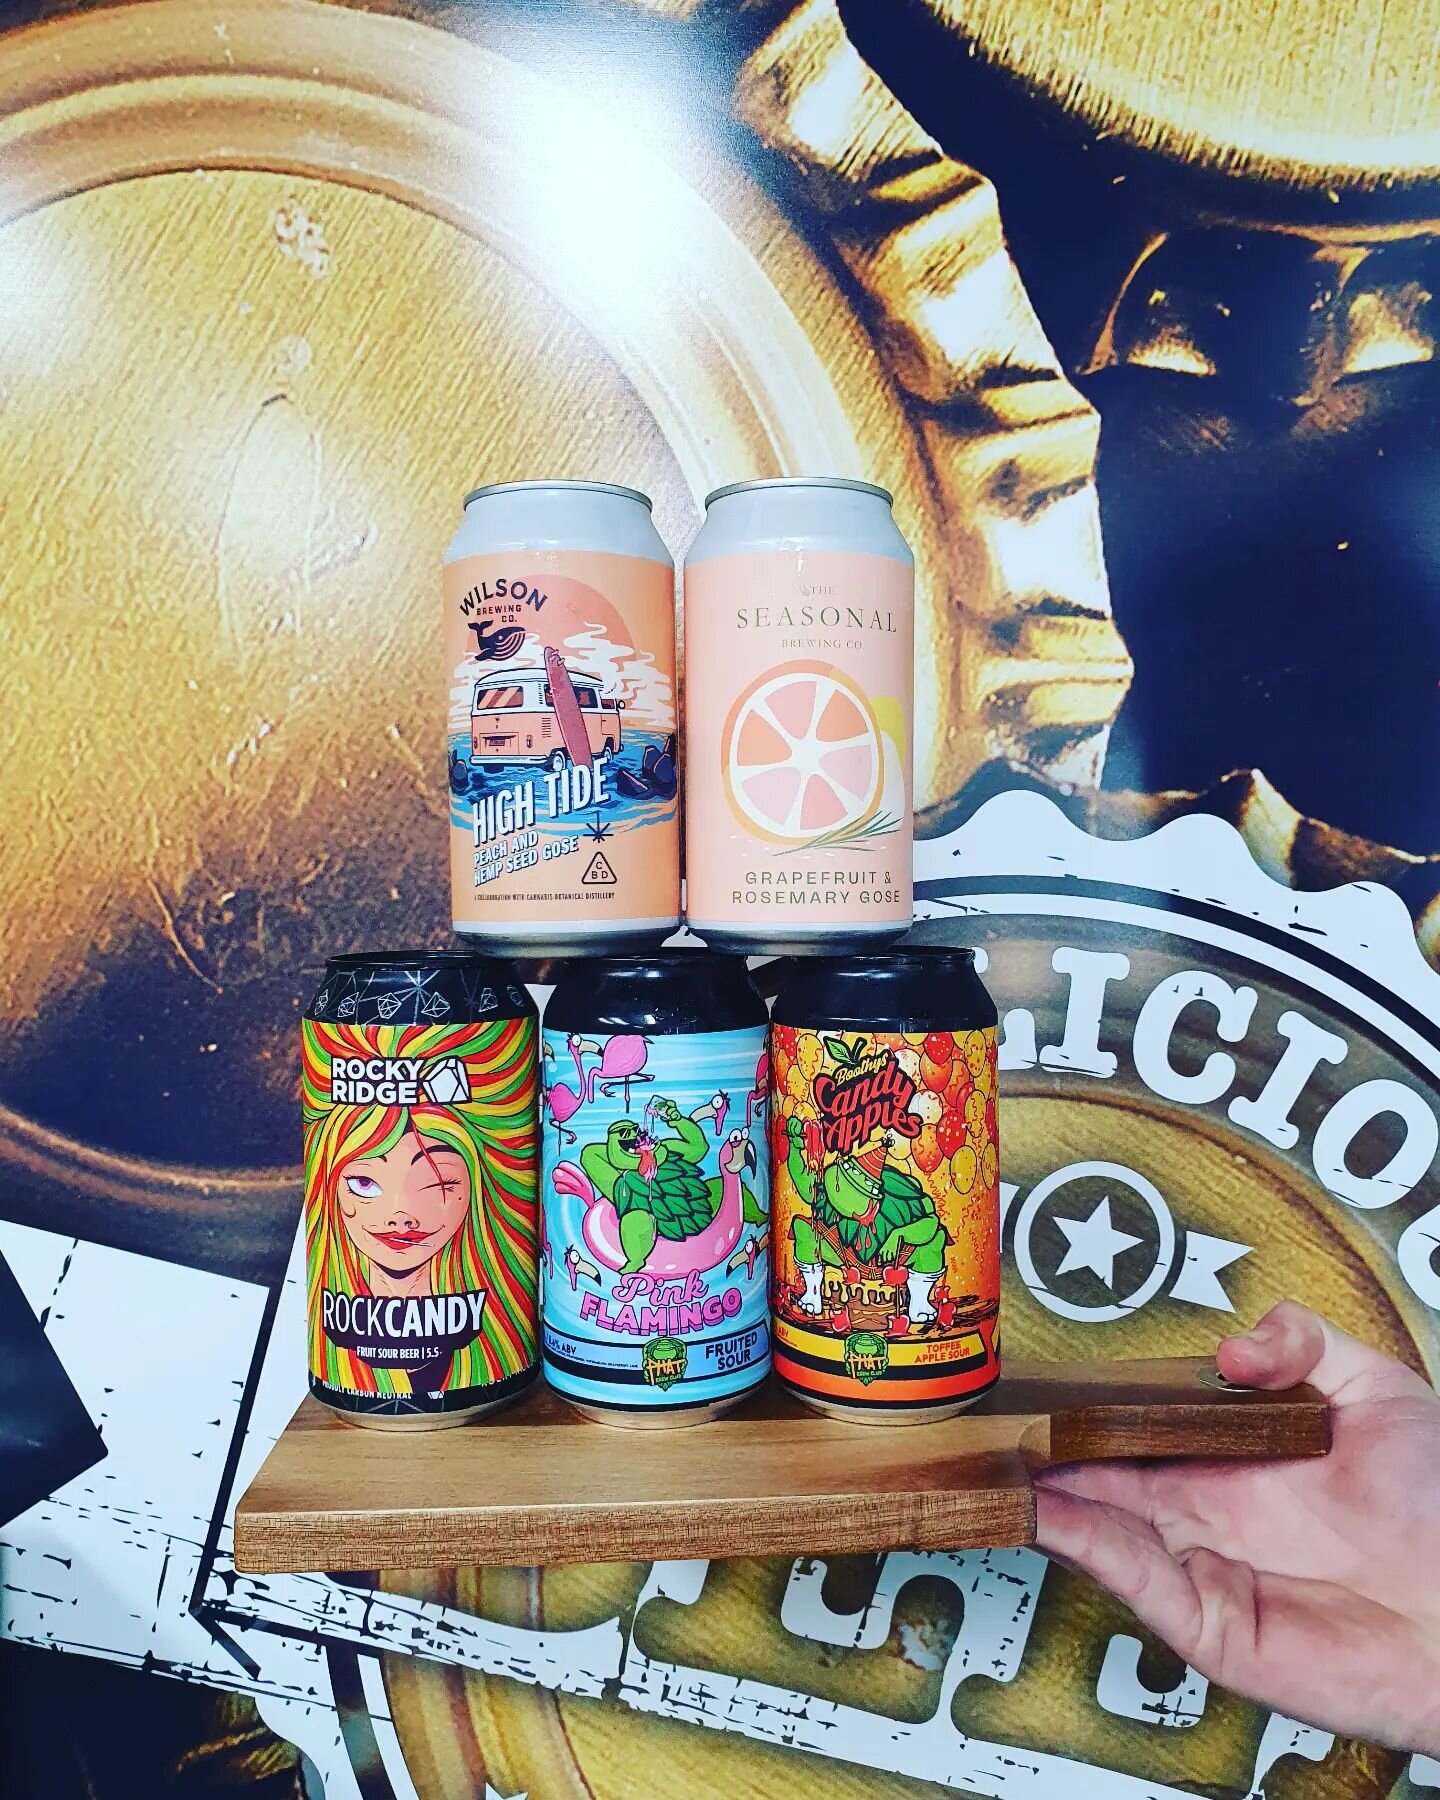 Sour season is here. A couple of new and limited editions have hit the store. Plenty more instore as well

🍑 Wilson - Peach &amp; Hemp Seed Gose
🍊 Seasonal - Grapefruit &amp; Rosemary Gose
🌈 Rocky Ridge - Rock Candy (Fruit Sour)
🔷 Phat Brewing - 